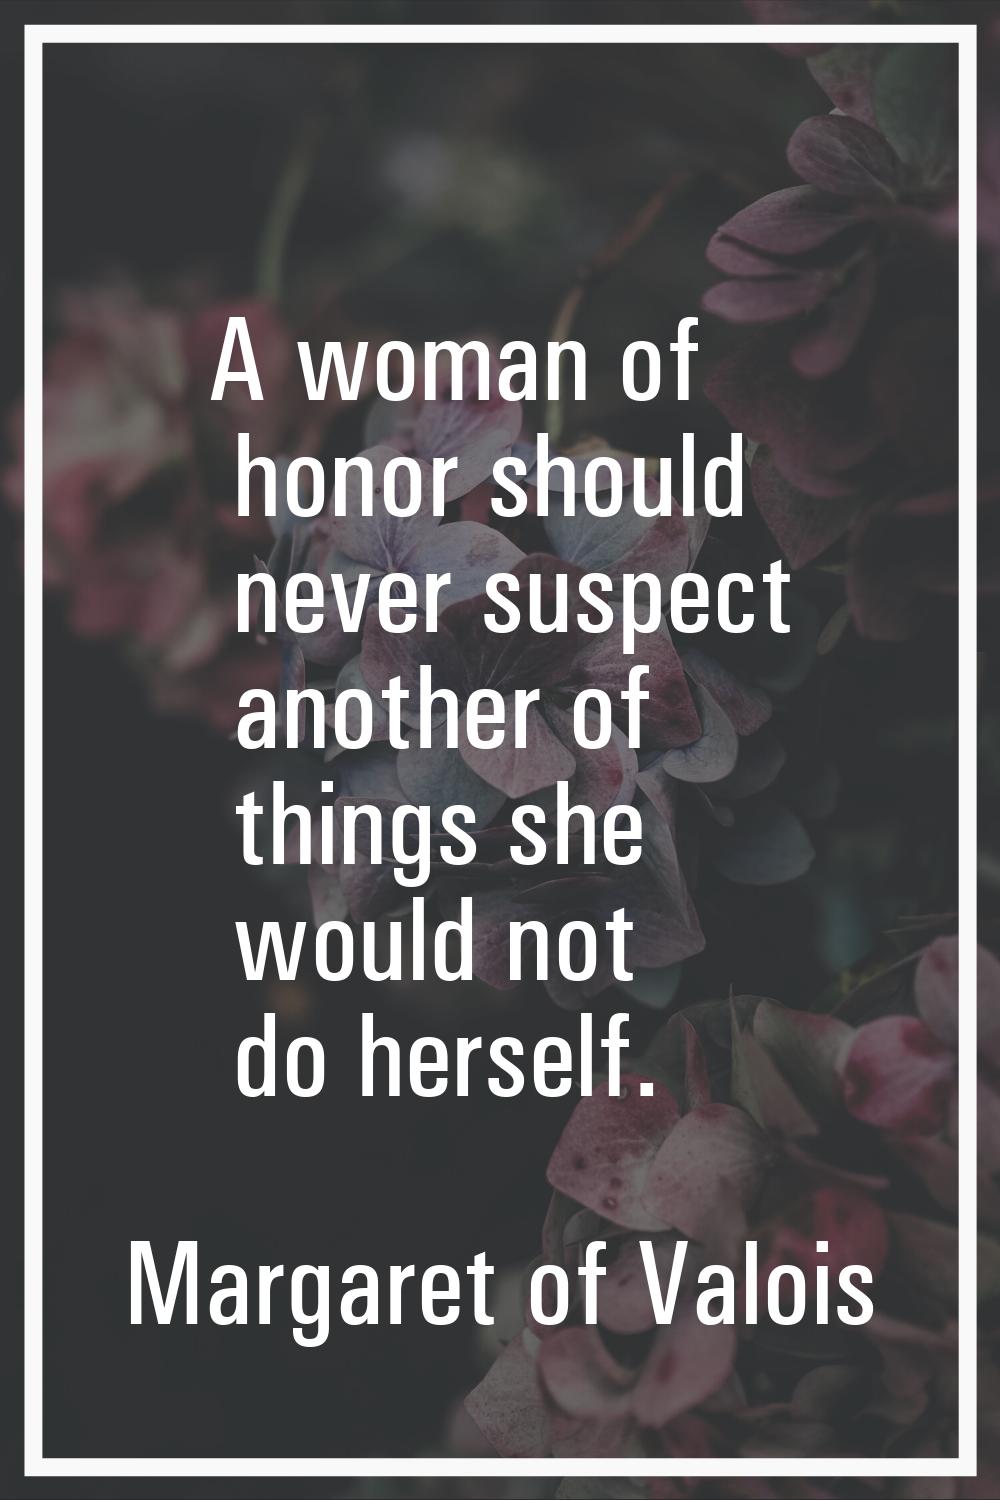 A woman of honor should never suspect another of things she would not do herself.